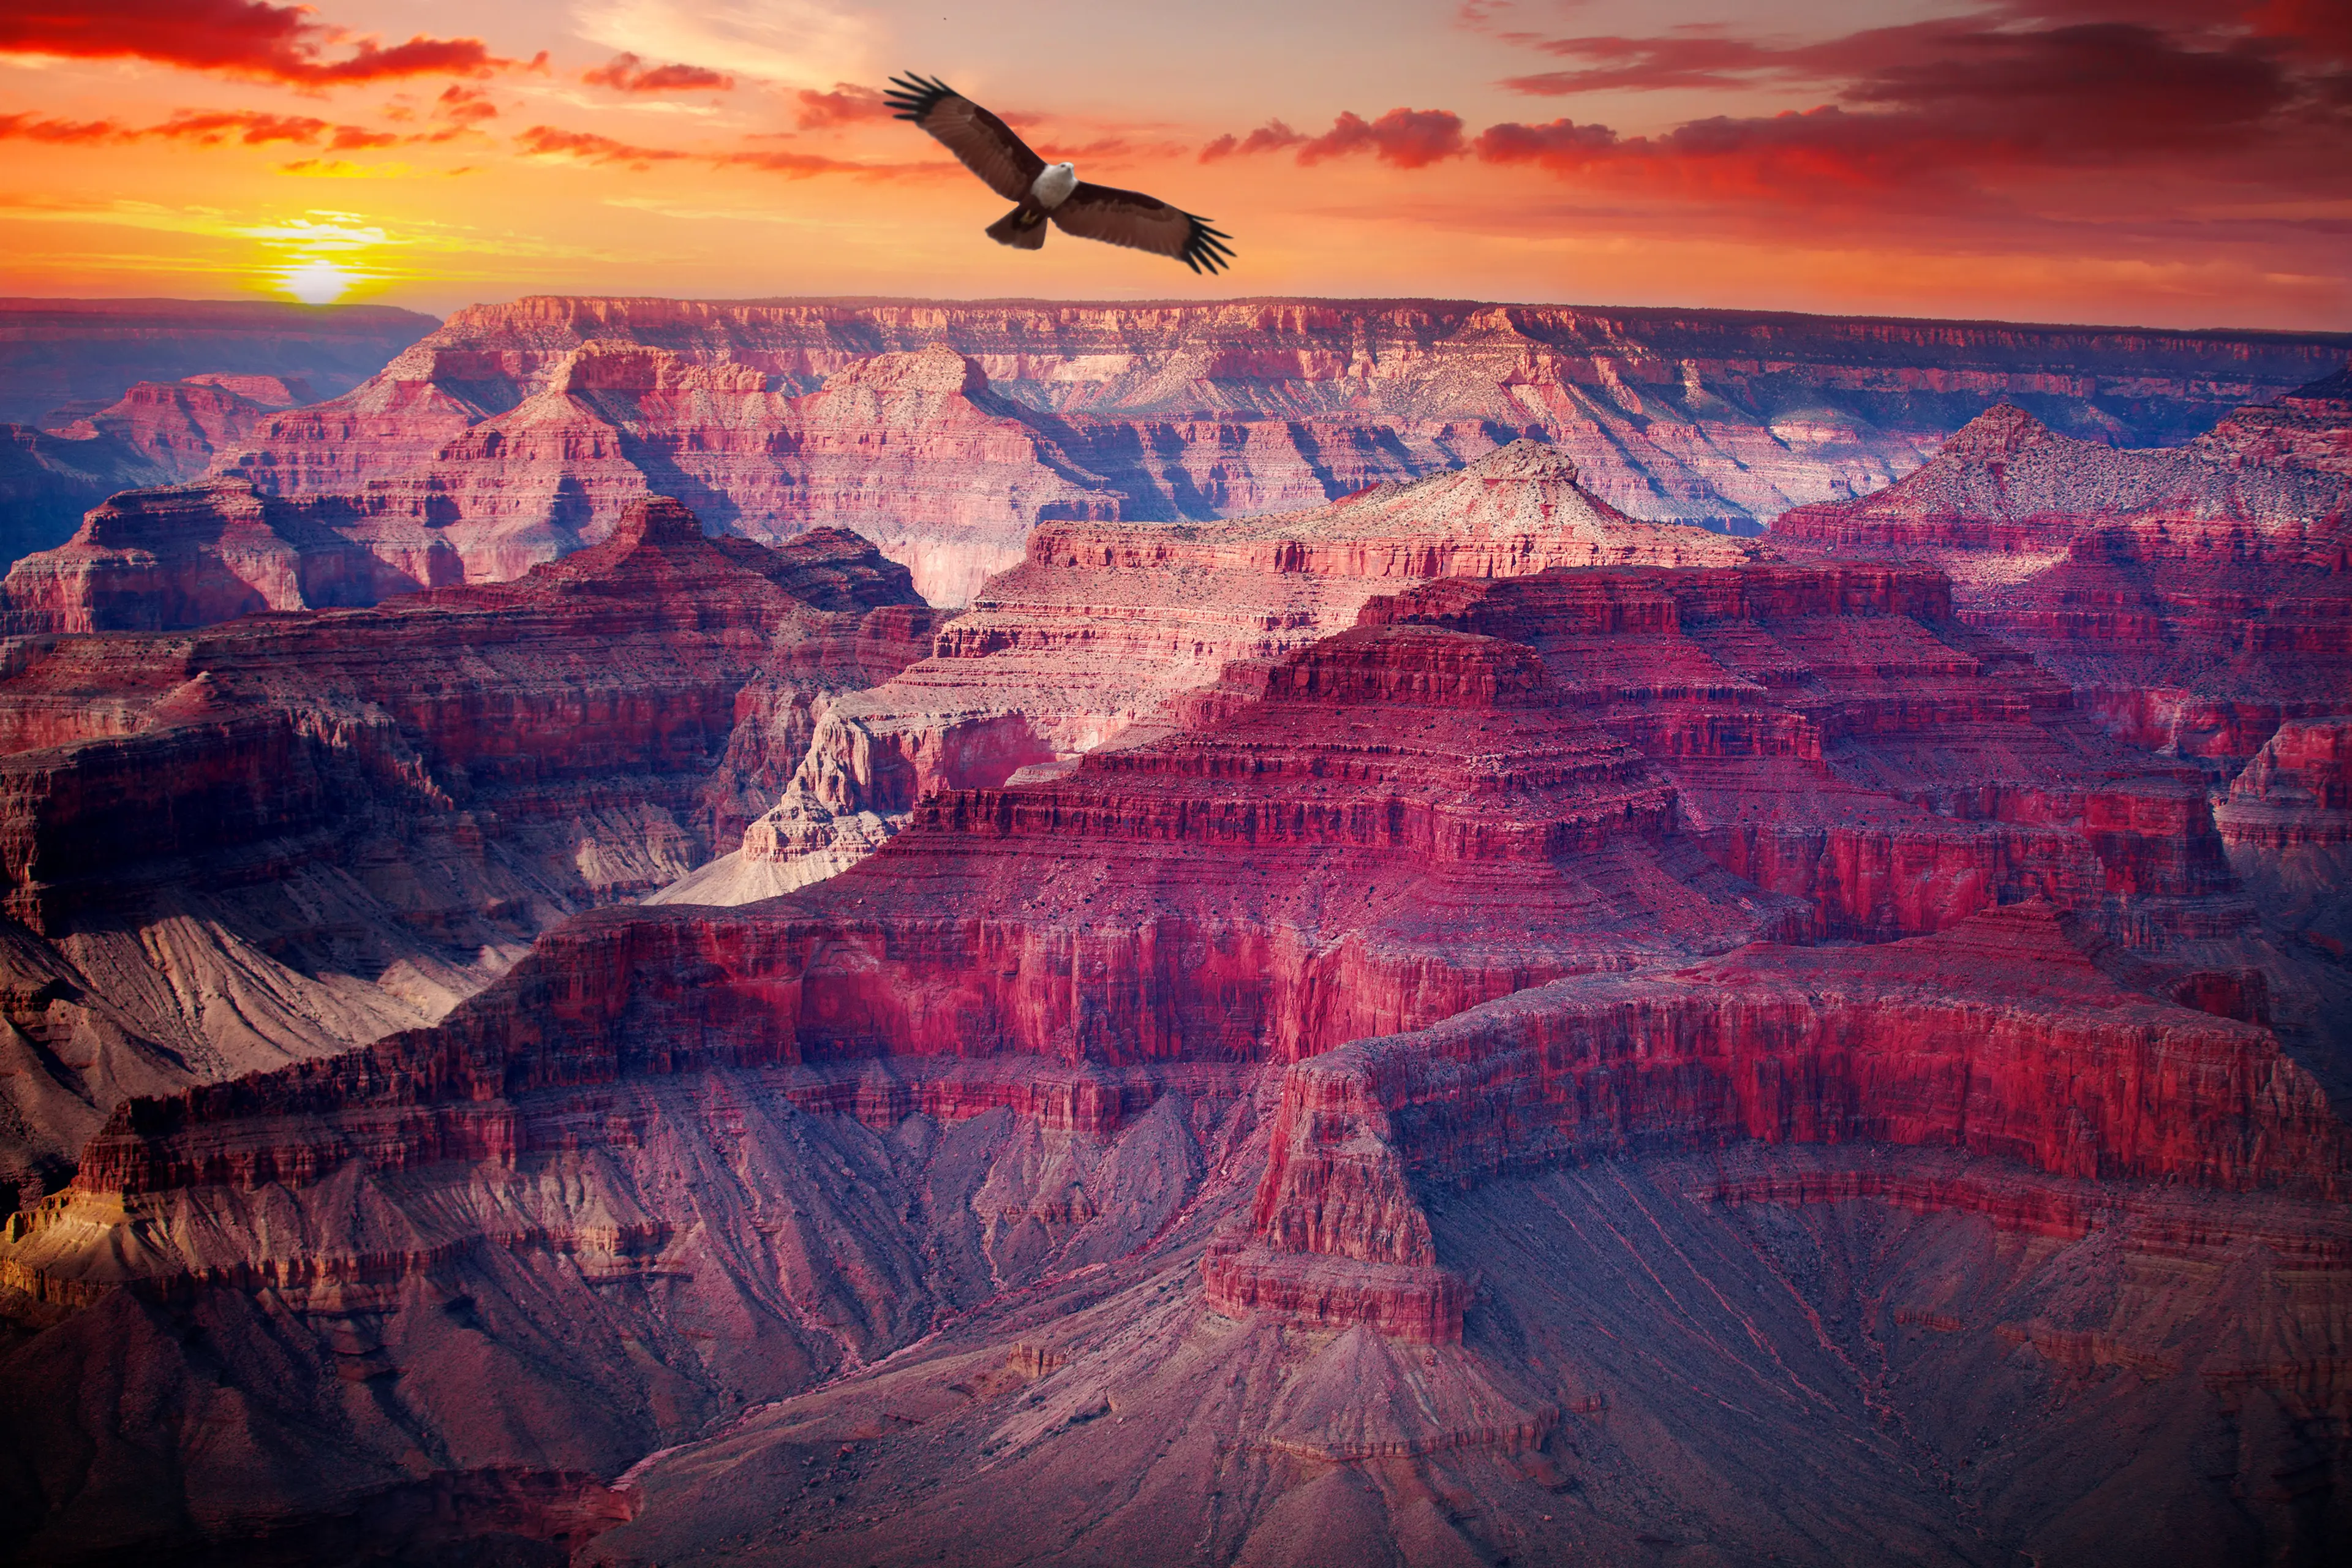 Bald eagle flying over the canyon